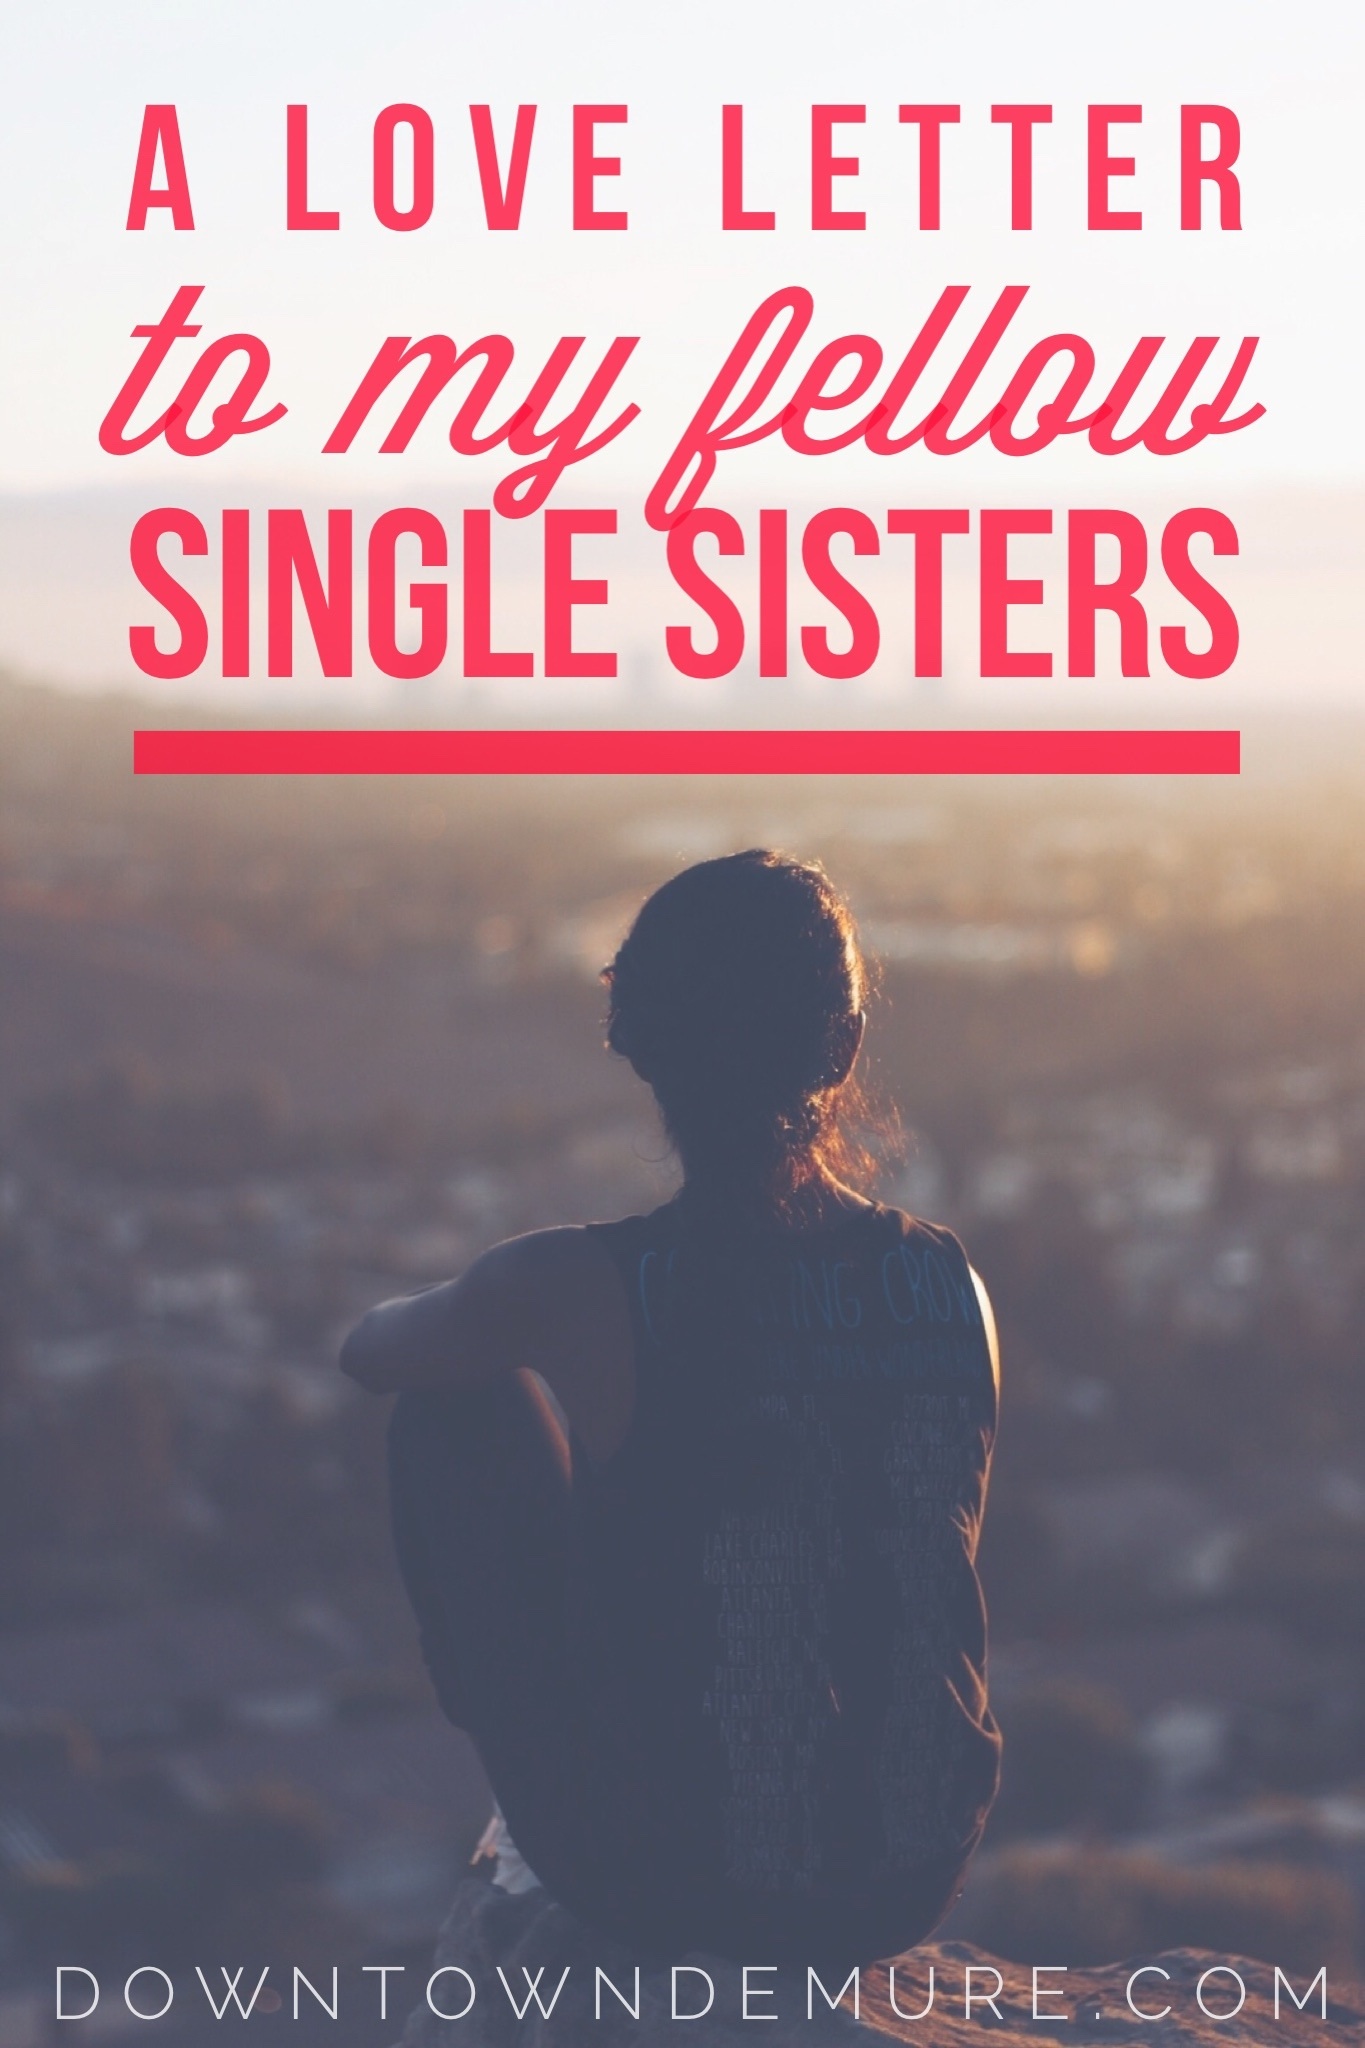 A Christian girl's love letter to her fellow single sisters